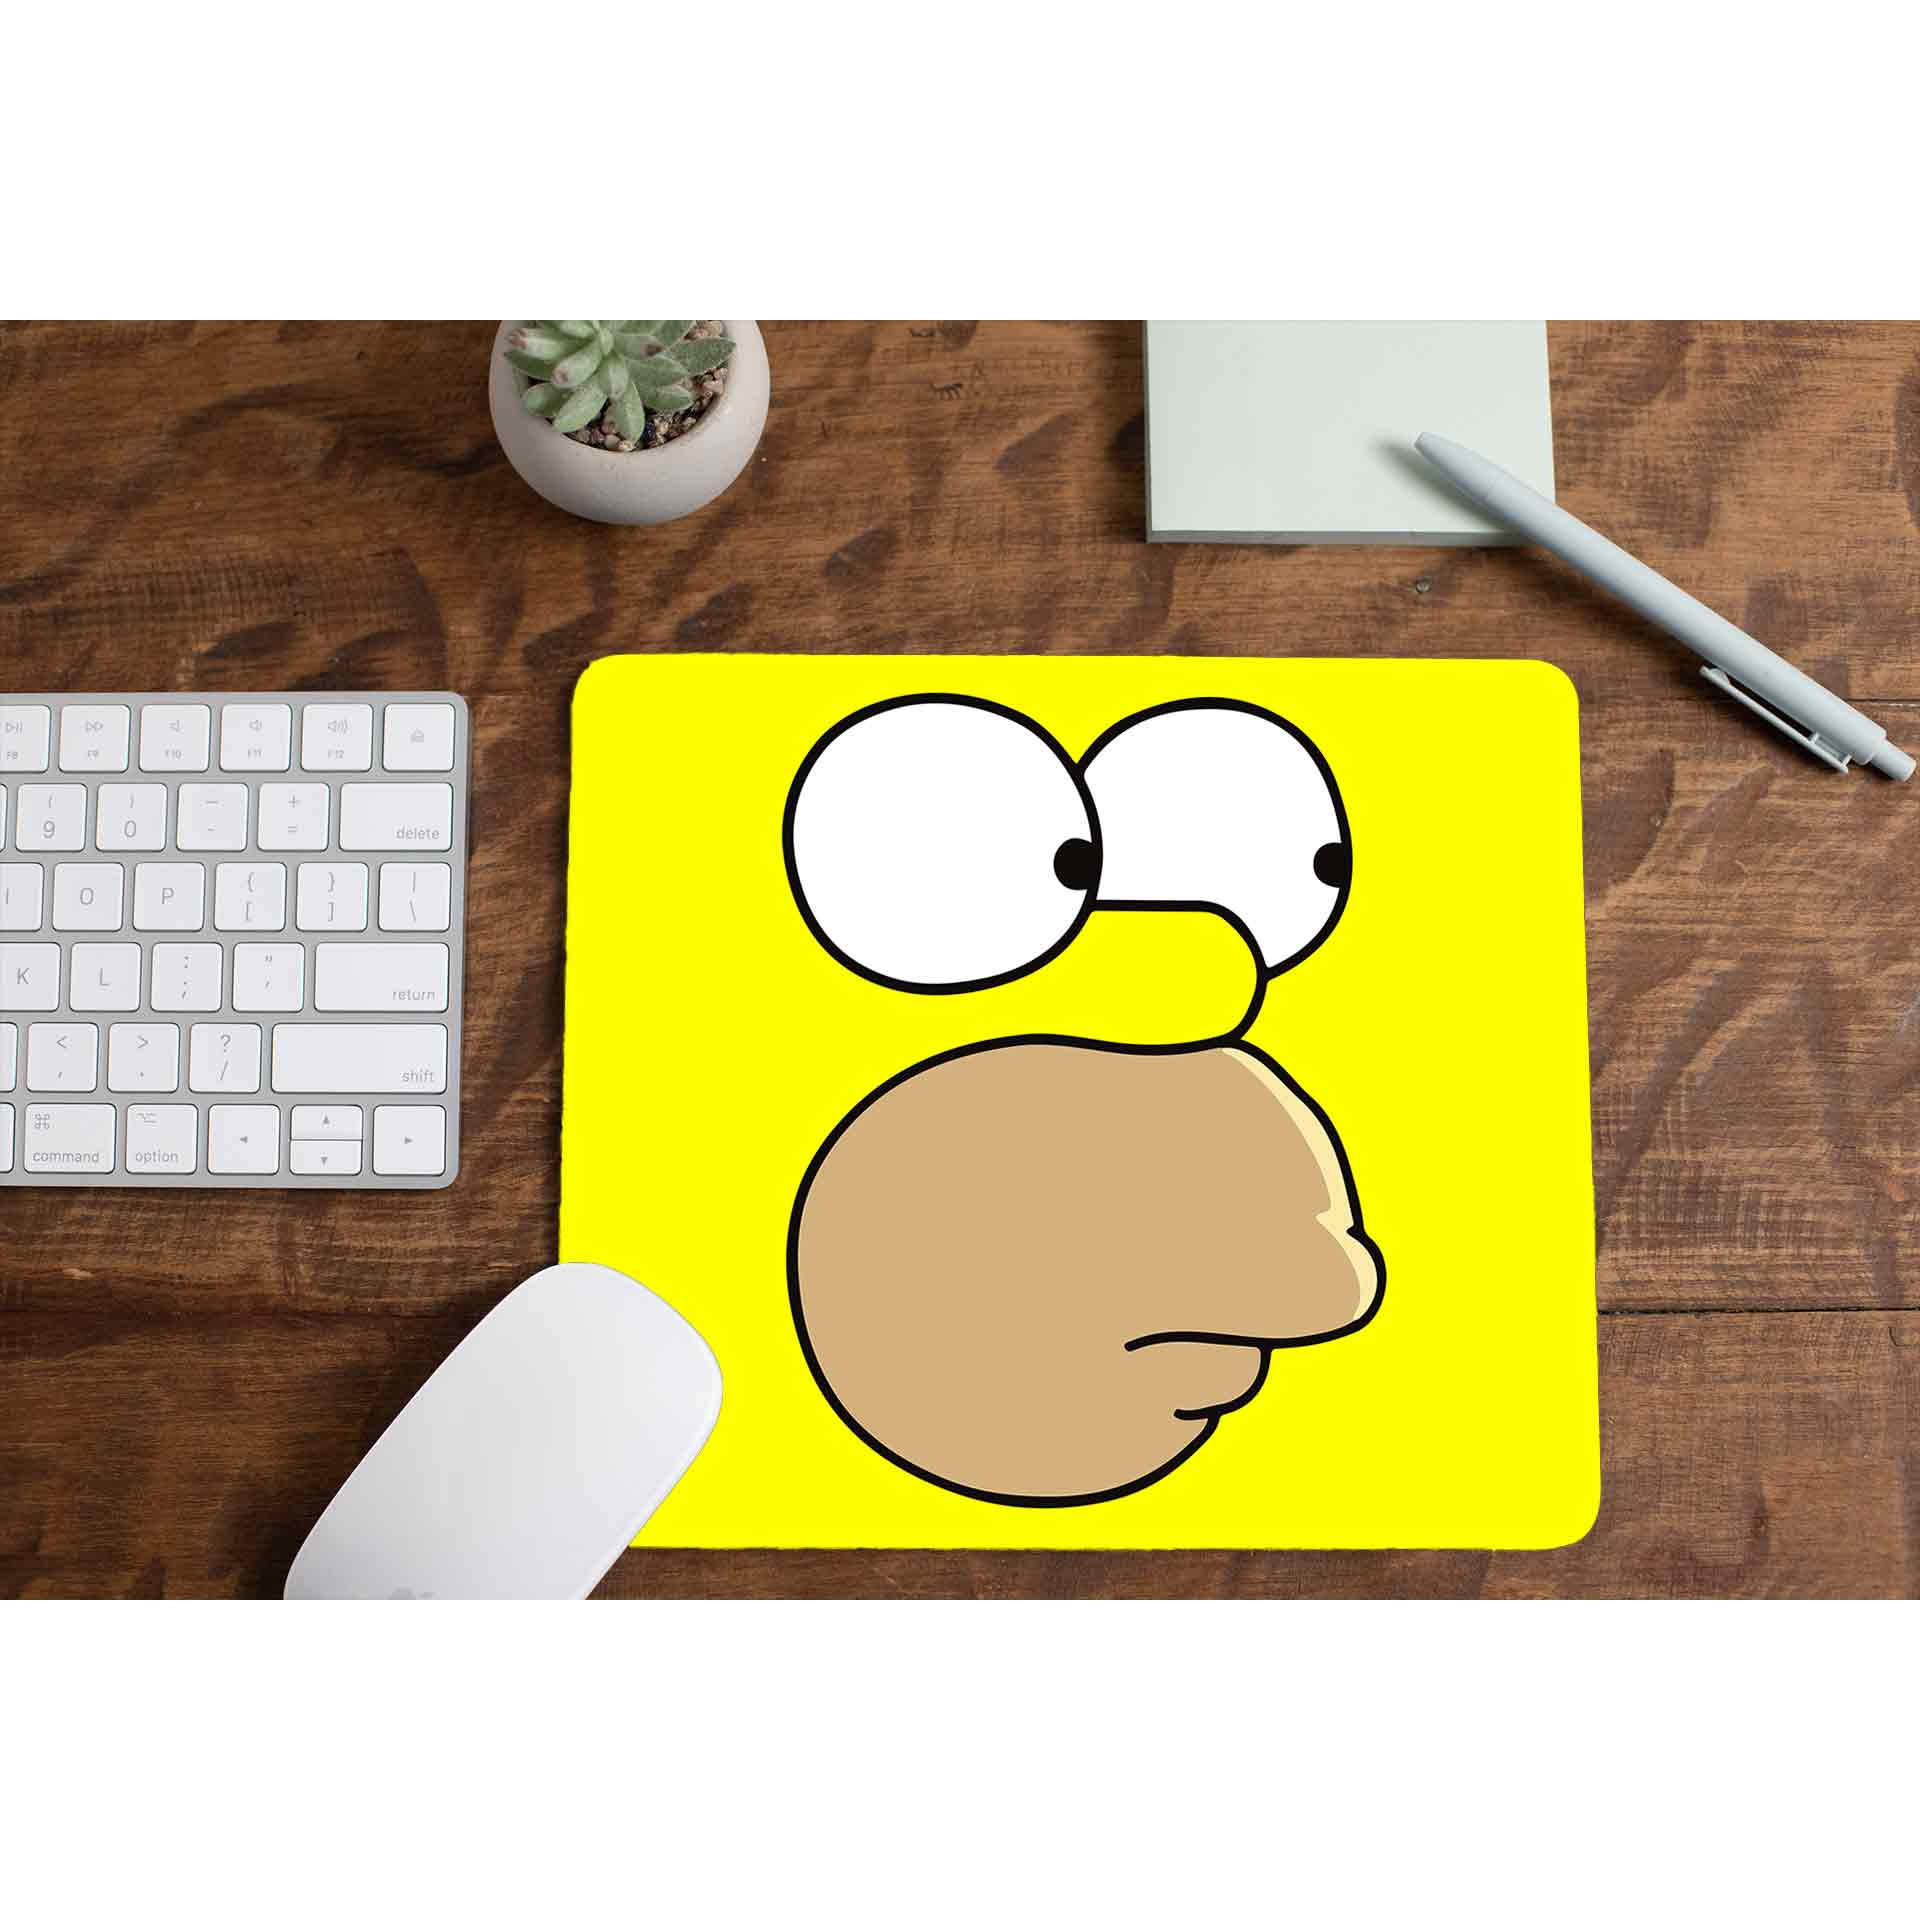 The Simpsons Mouse pad by The Banyan Tee TBT